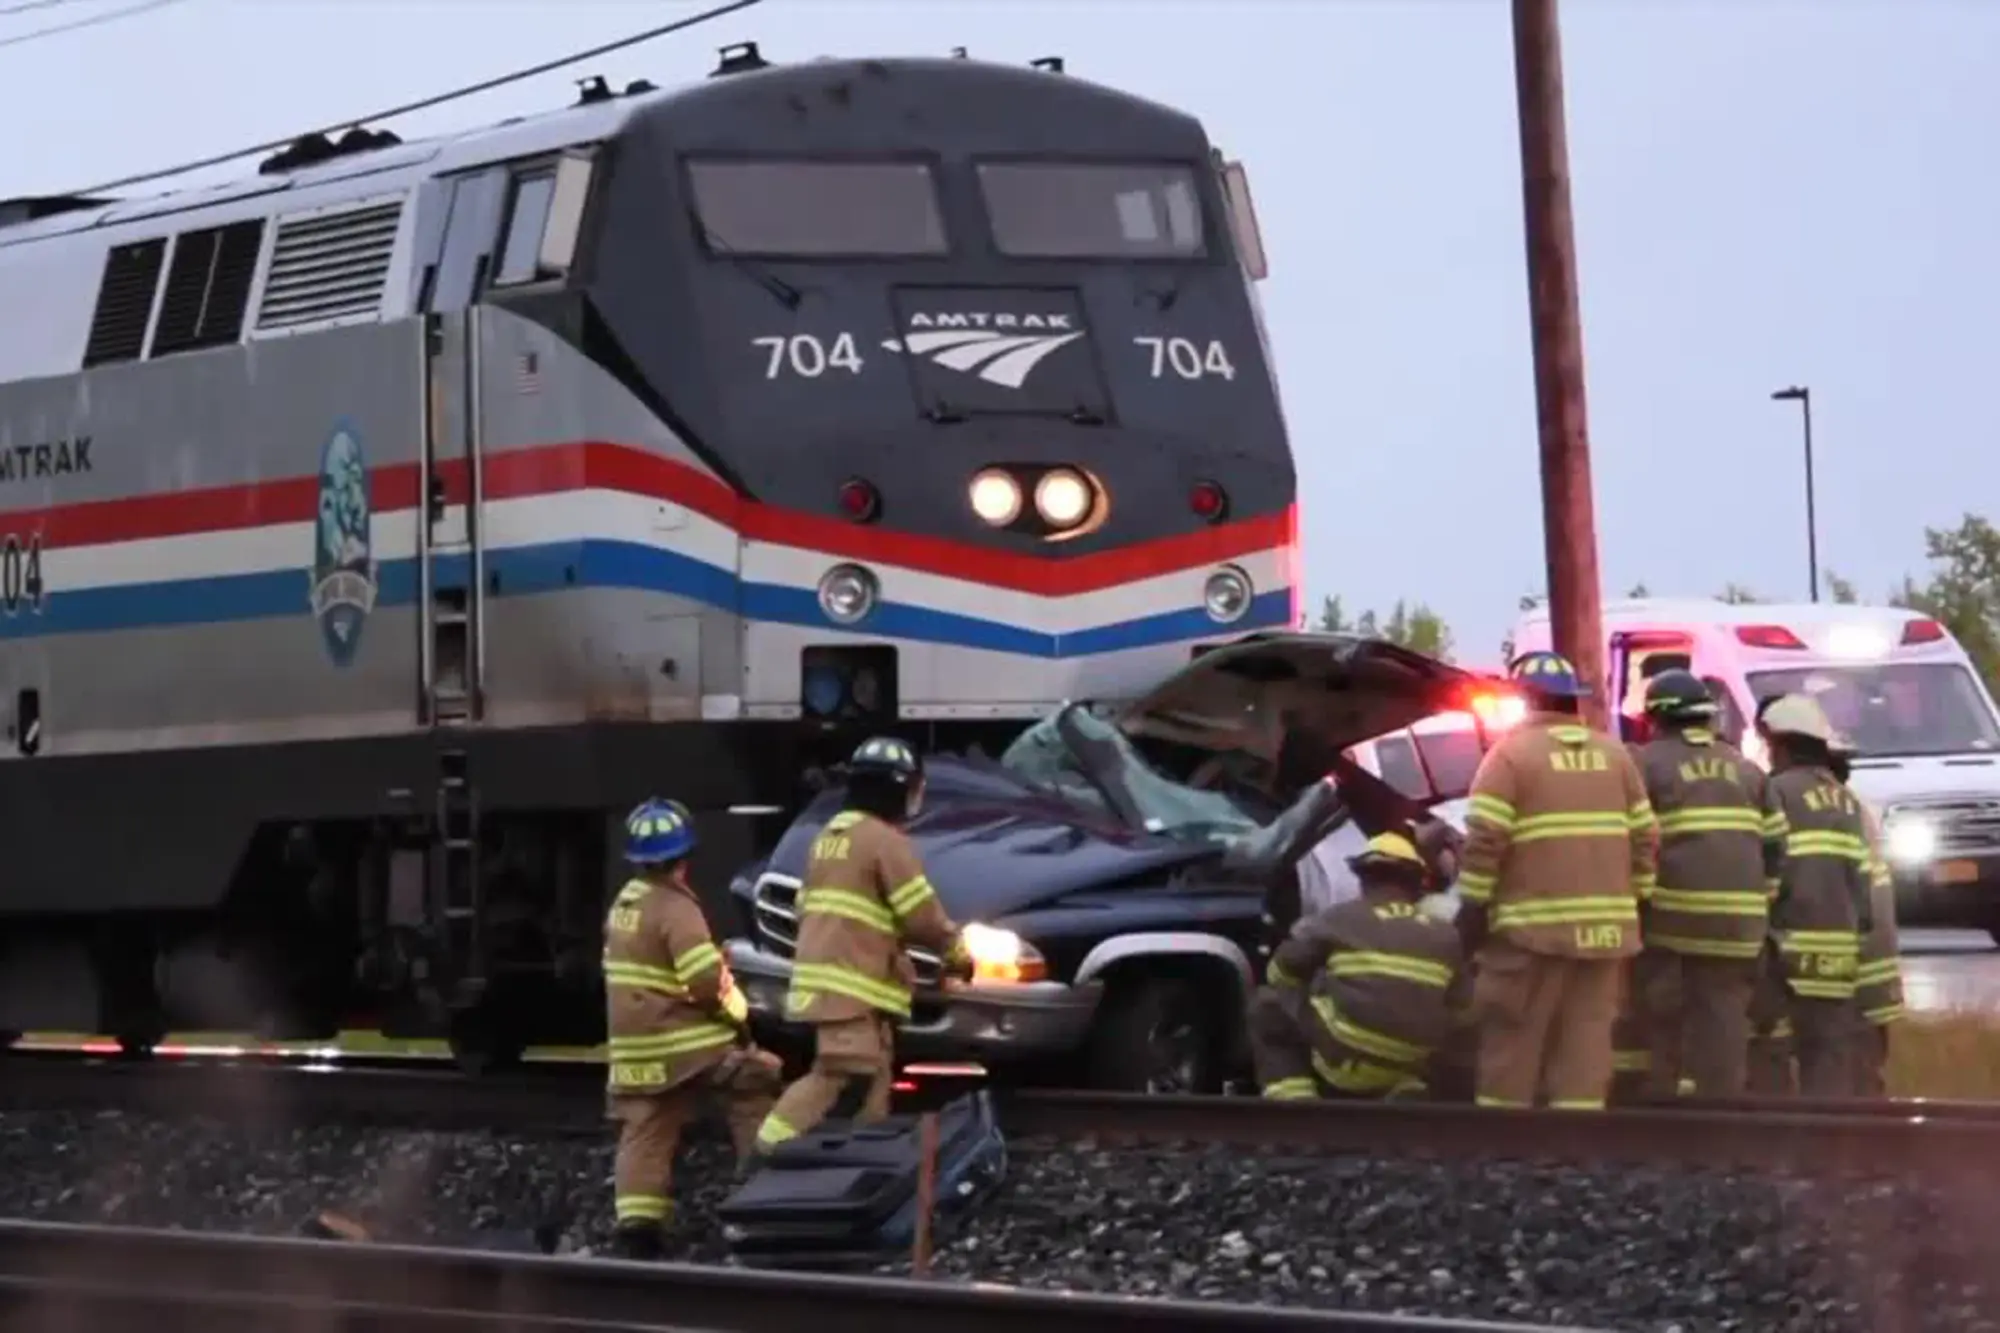 Heartbreak in Upstate NY: 6-Year-Old Among 3 Dead in Amtrak Train-Truck Collision